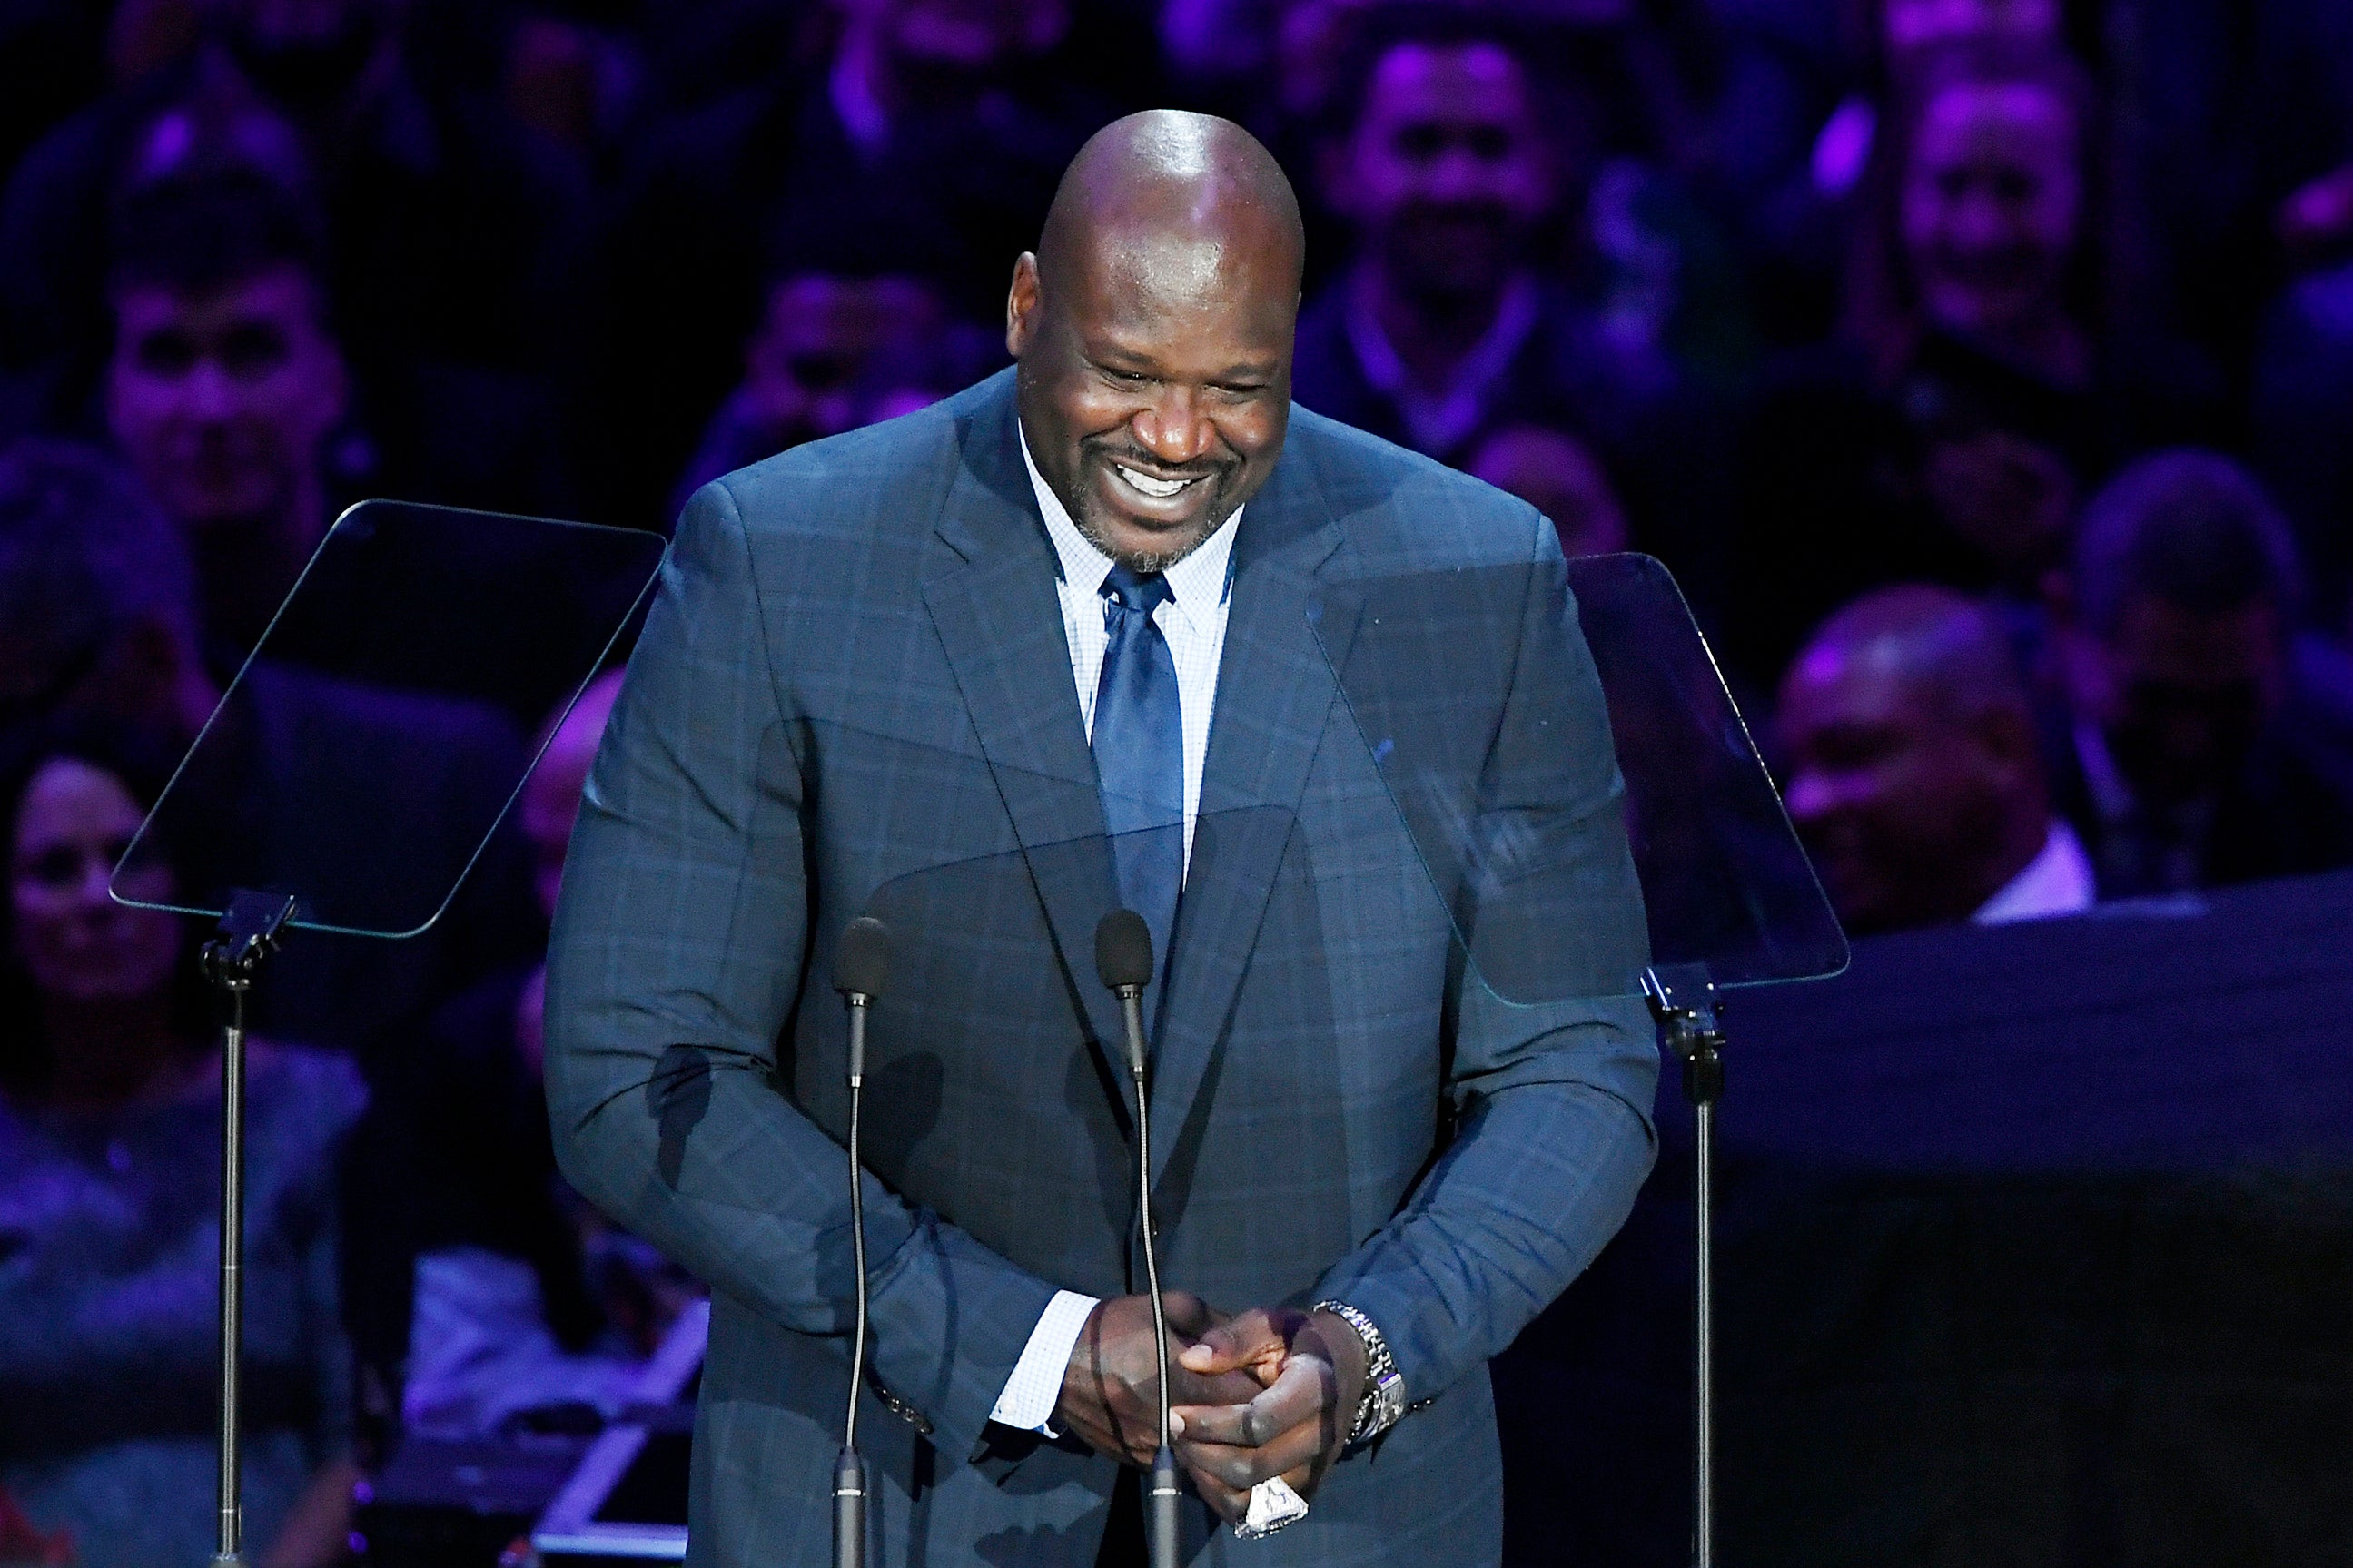 Shaquille O'Neal on Kobe Bryant Retirement: “A Poem, Seriously